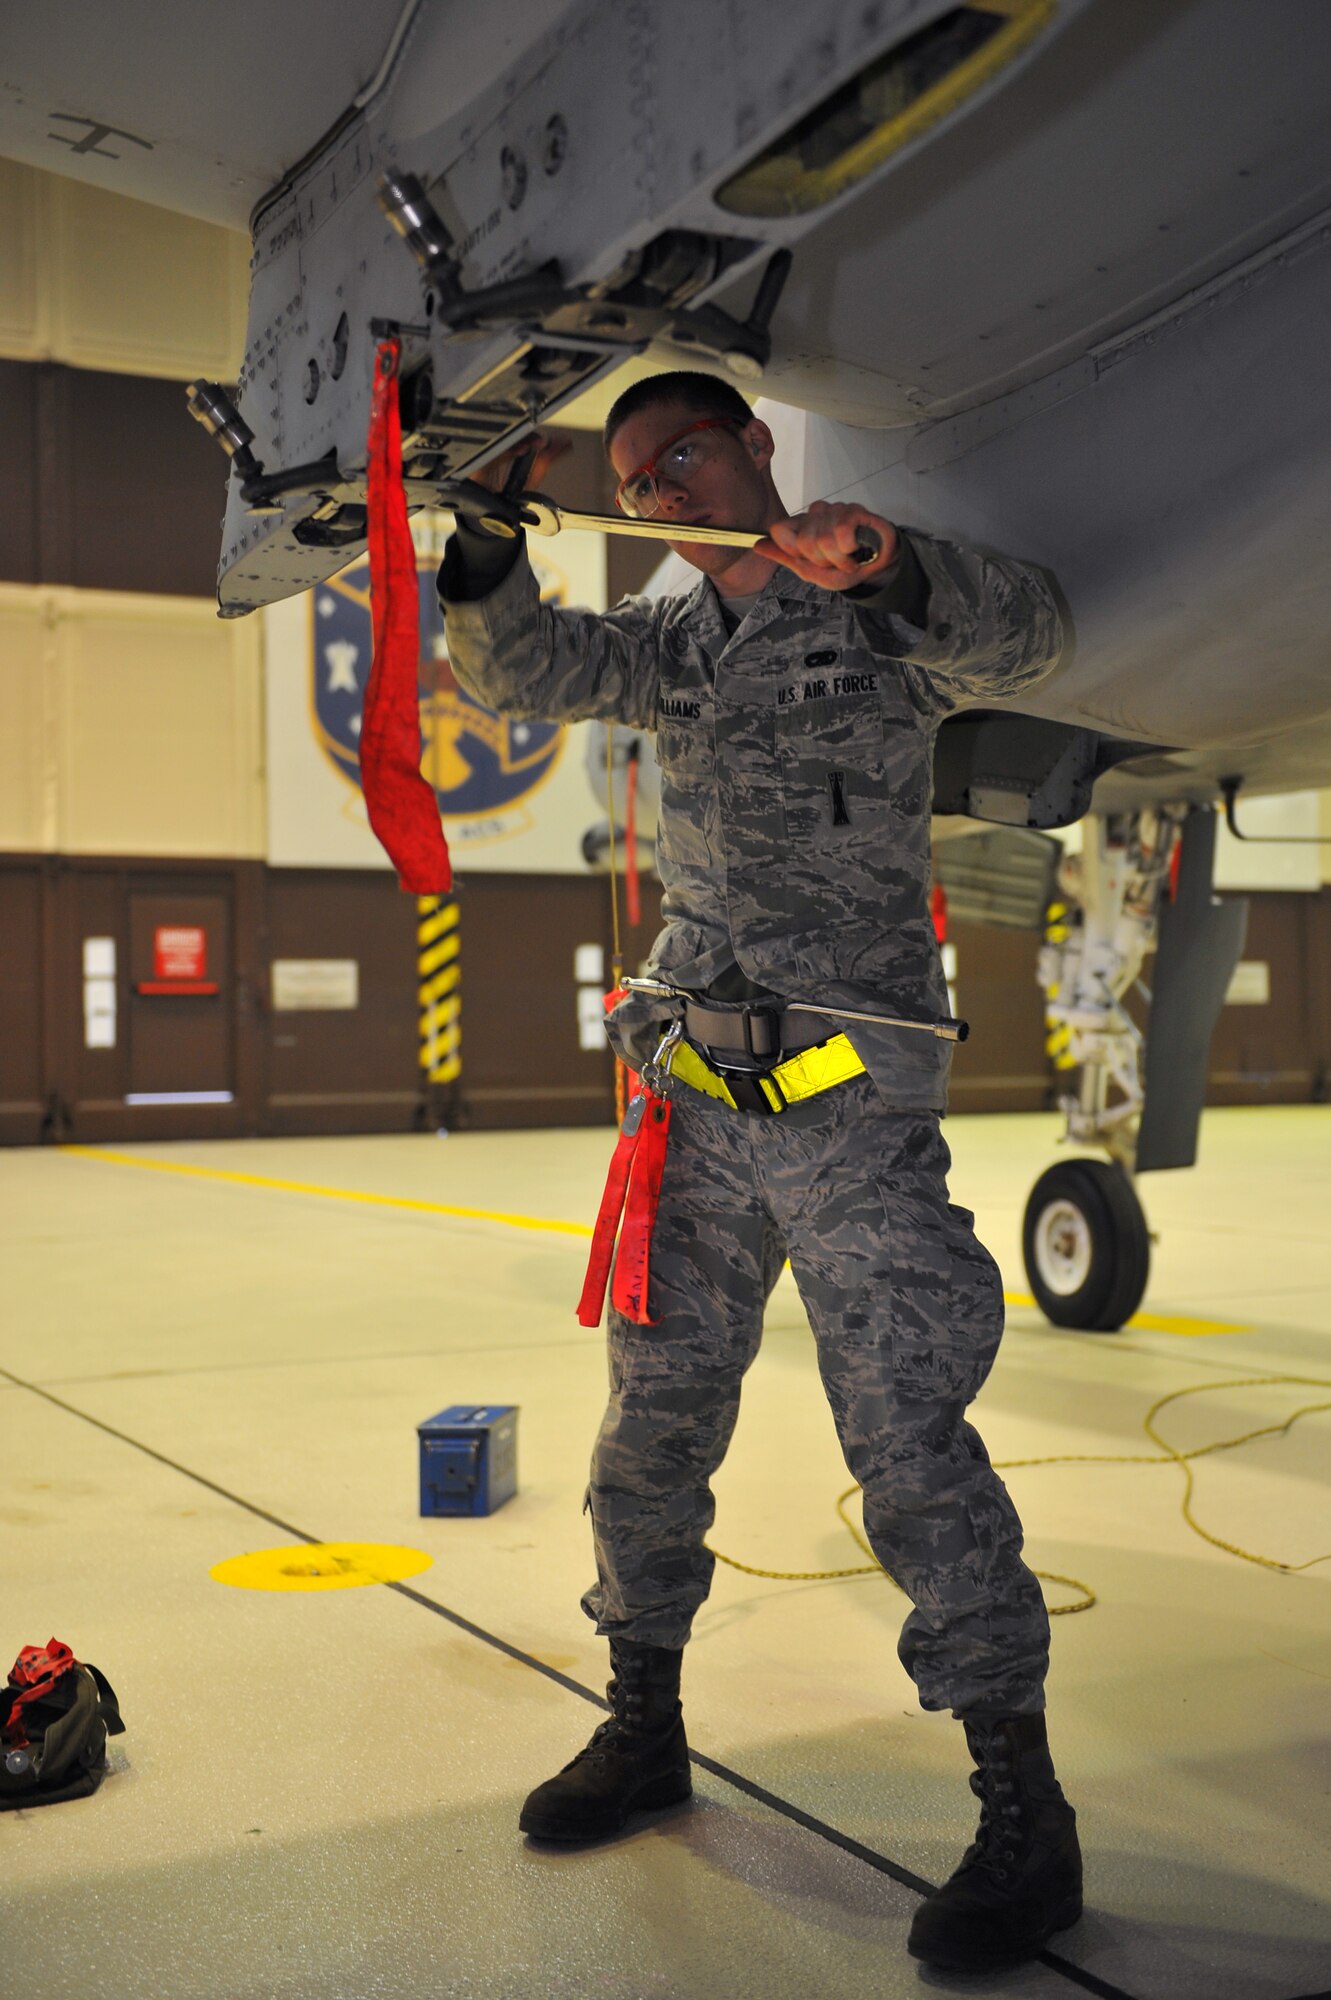 SPANGDAHLEM AIR BASE, Germany – Airman 1st Class Eric Williams, 52nd Aircraft Maintenance Squadron load crew member, prepares an A-10 Thunderbolt II’s MAU-40 bomb rack during a monthly munitions loading evaluation here Nov. 29. The evaluation ensures load-crew members and team chiefs retain their qualification to load all munitions and are ready for mission taskings. Crew members complete an evaluation every month and are required to be evaluated annually while wearing chemical-warfare gear. (U.S. Air Force photo/Airman 1st Class Dillon Davis)